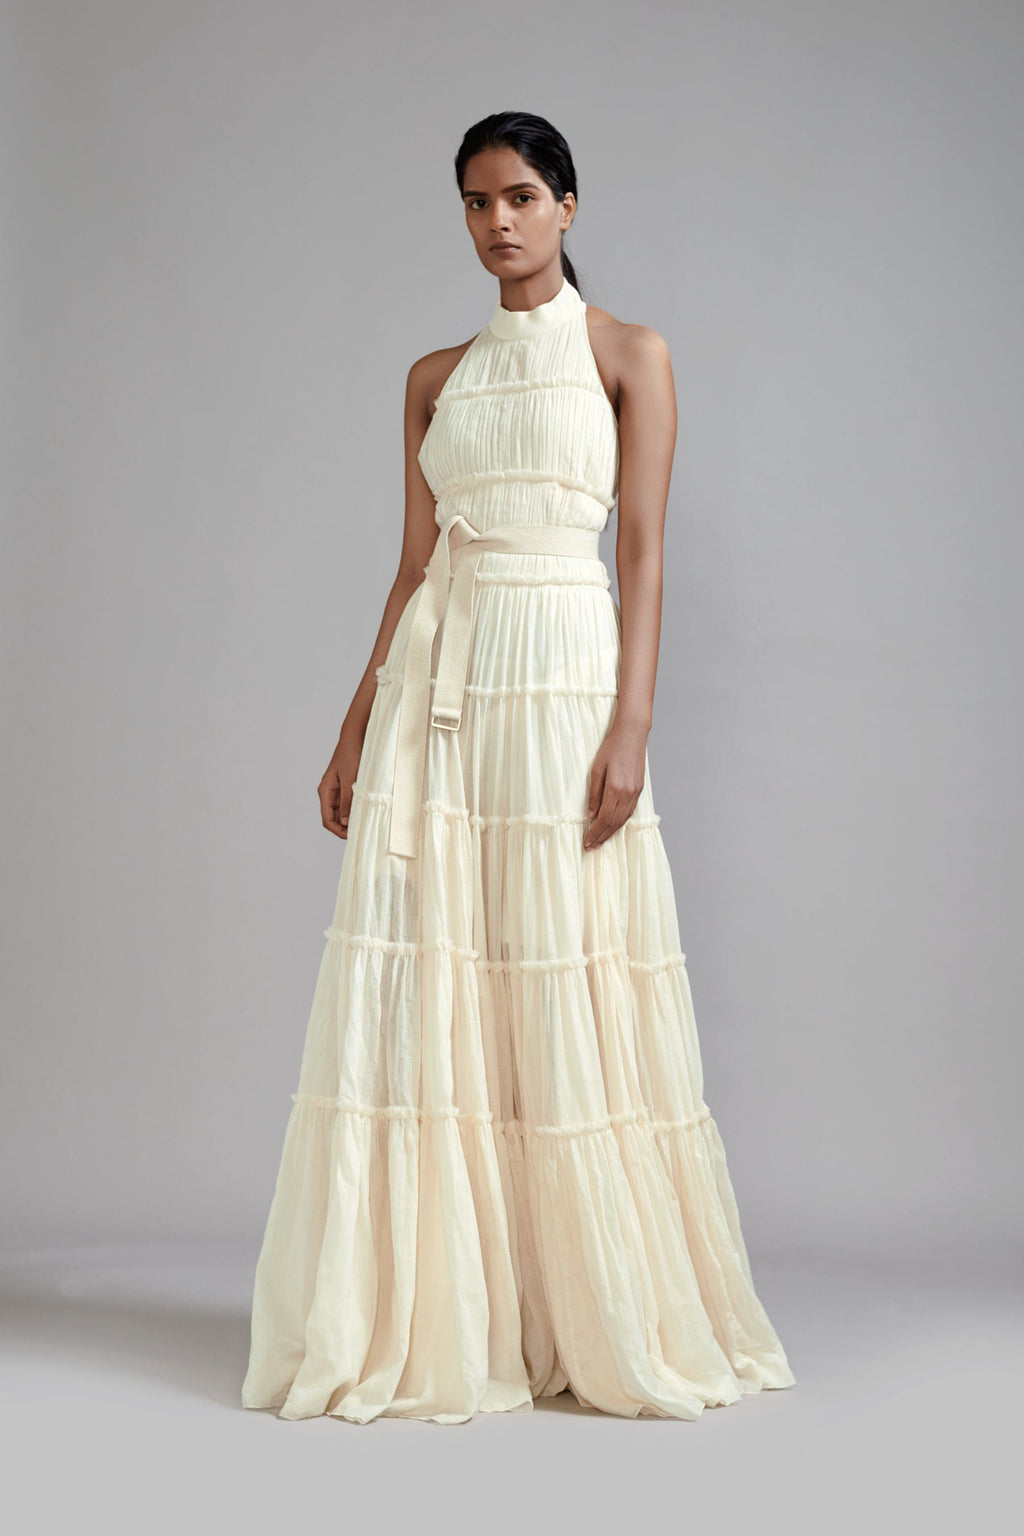 Mati Dresses XS Off-White Backless Tiered Gown